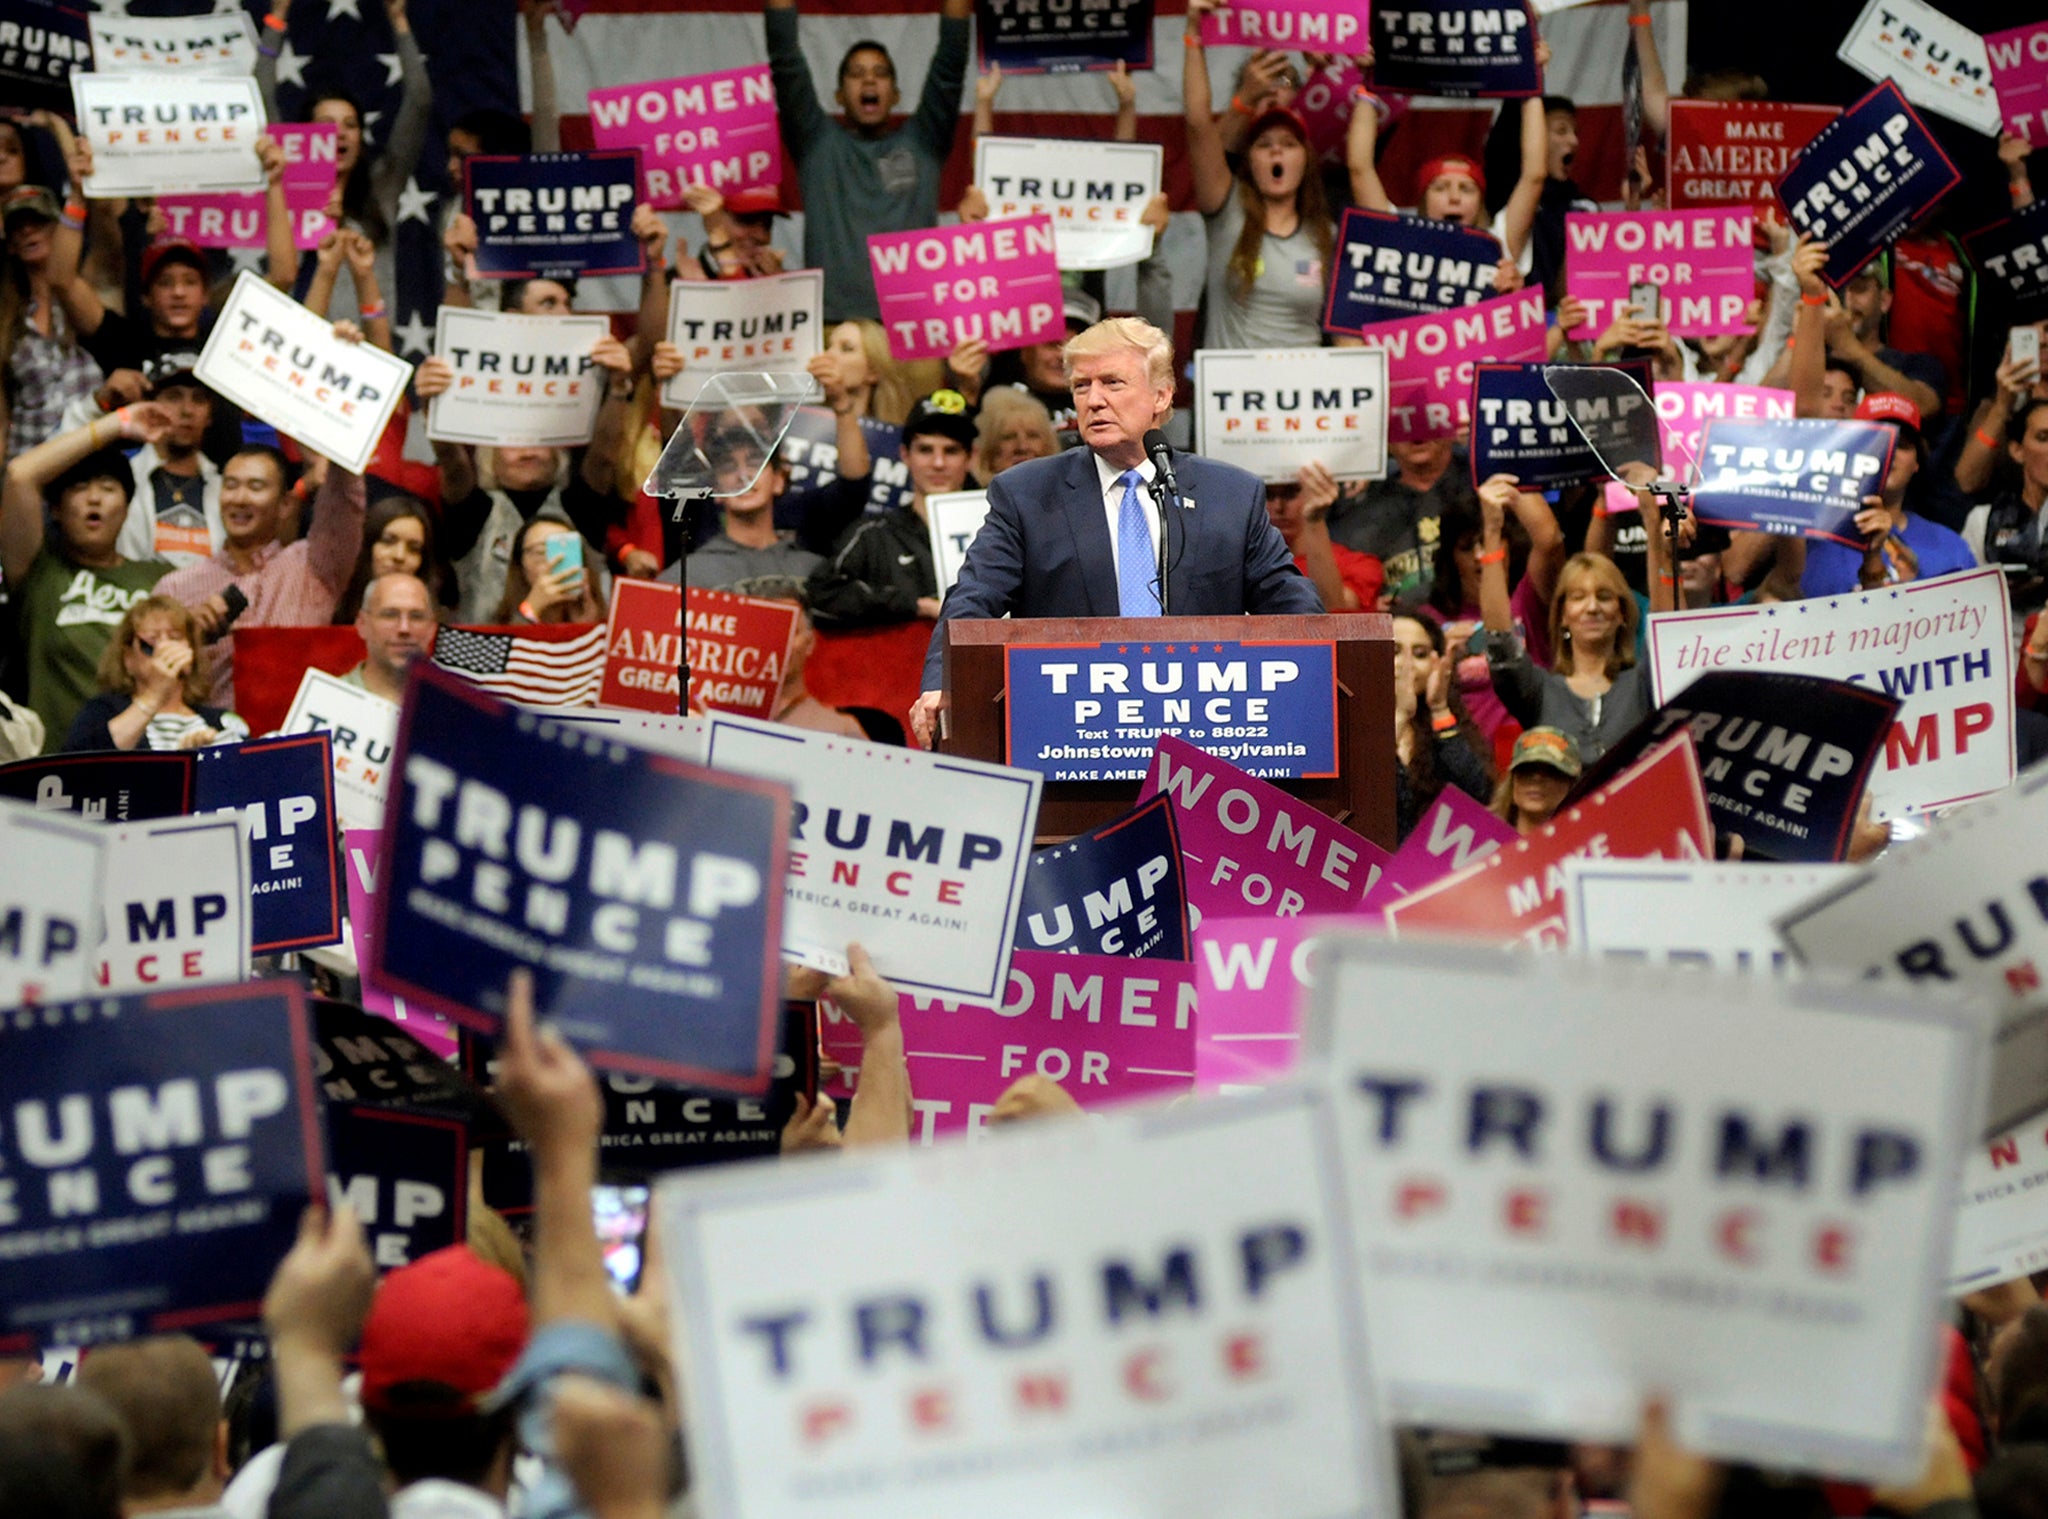 Republican presidential nominee Donald Trump rallies supporters at the Cambria County War Memorial Arena in Johnstown, Pa